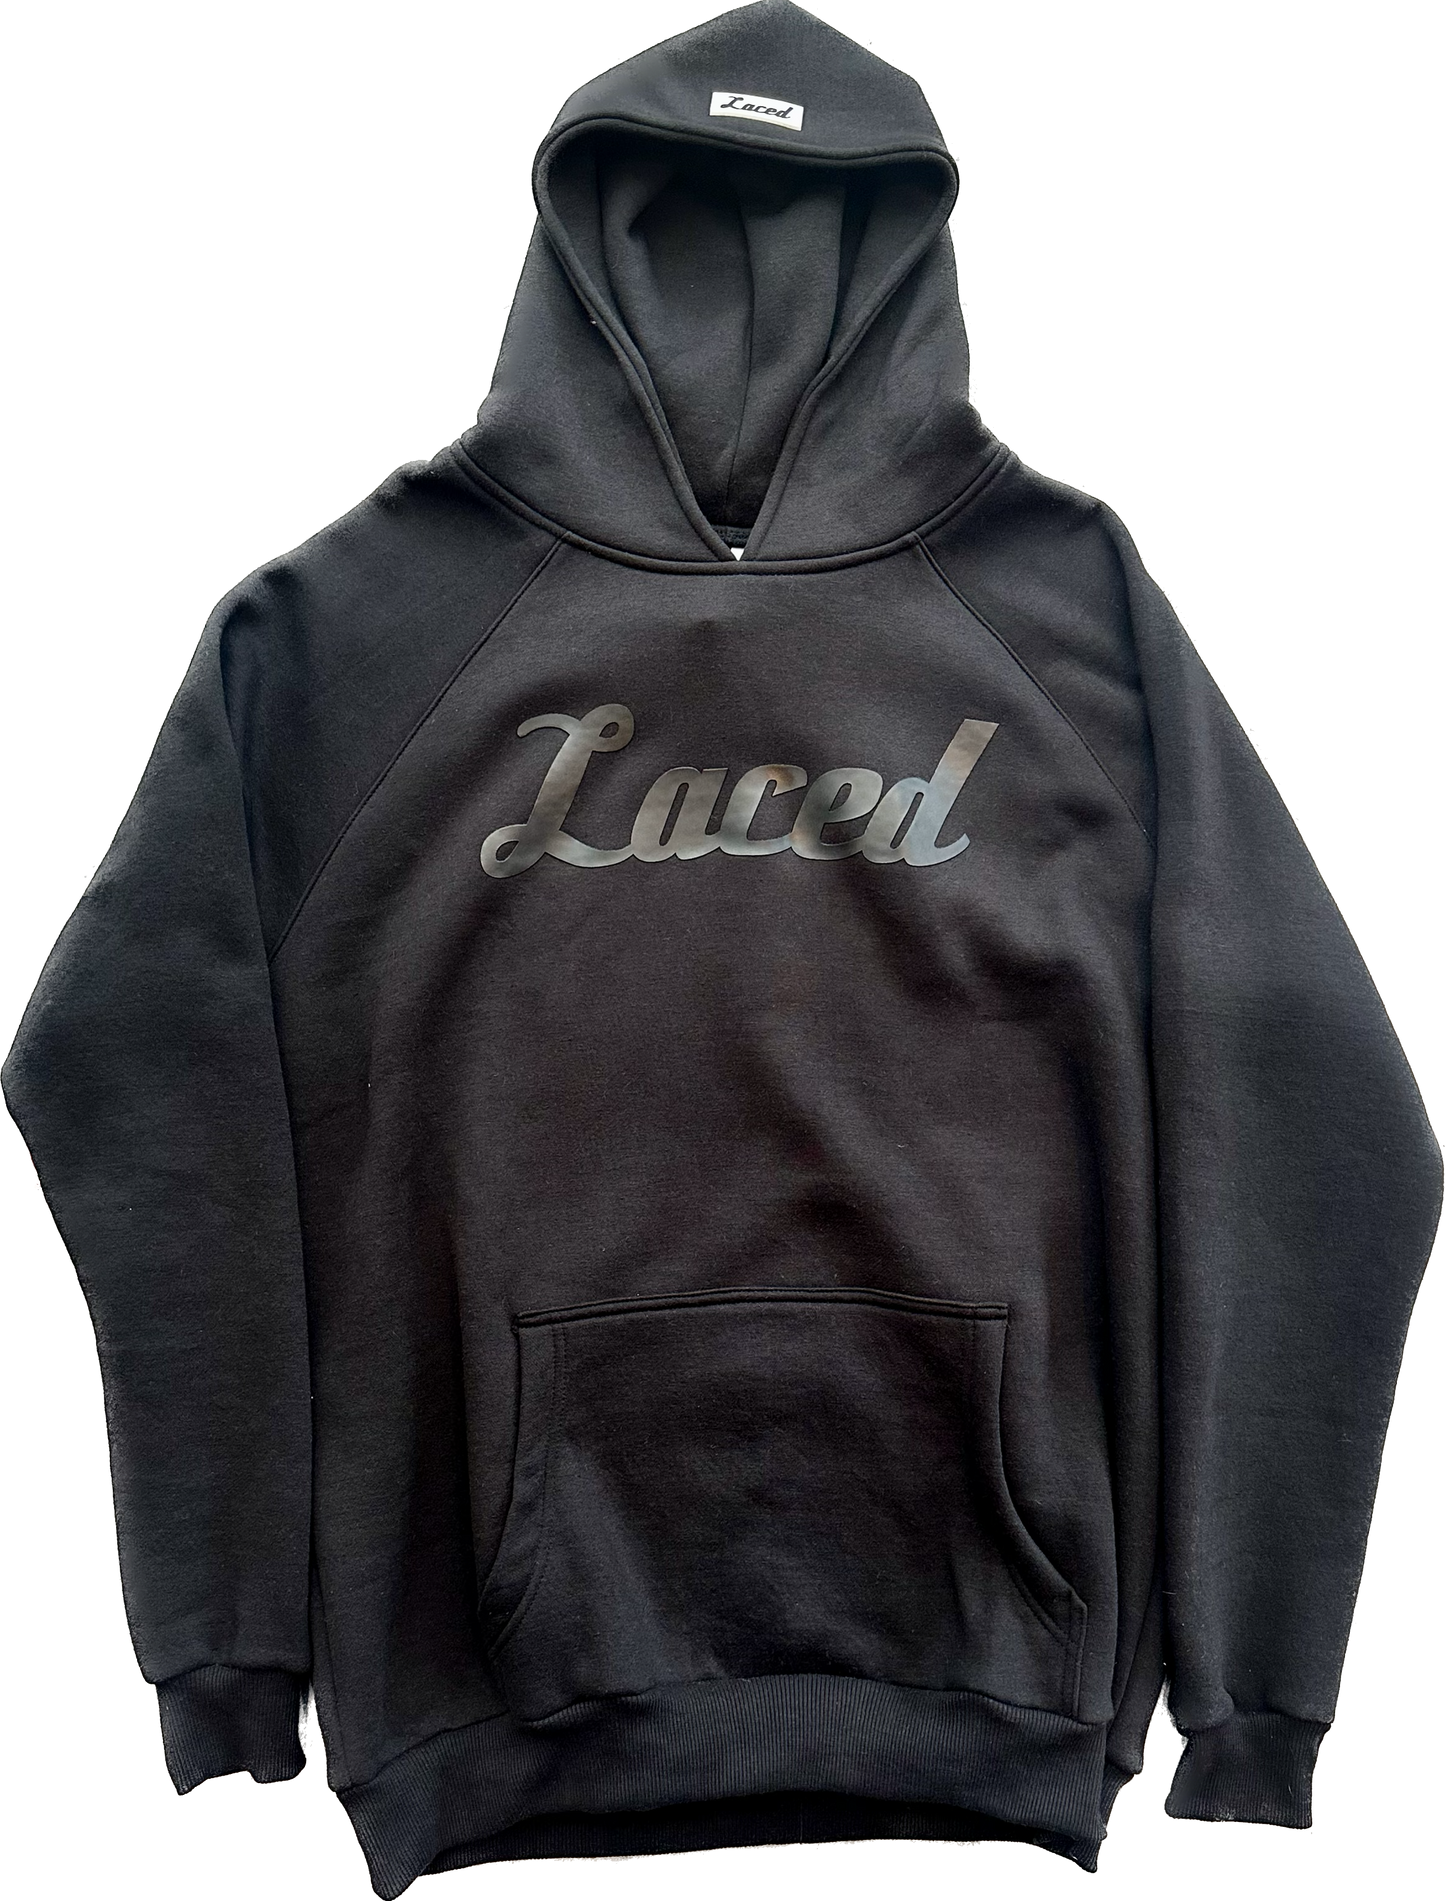 Laced Elements Collection Hooded Sweatshirt Black